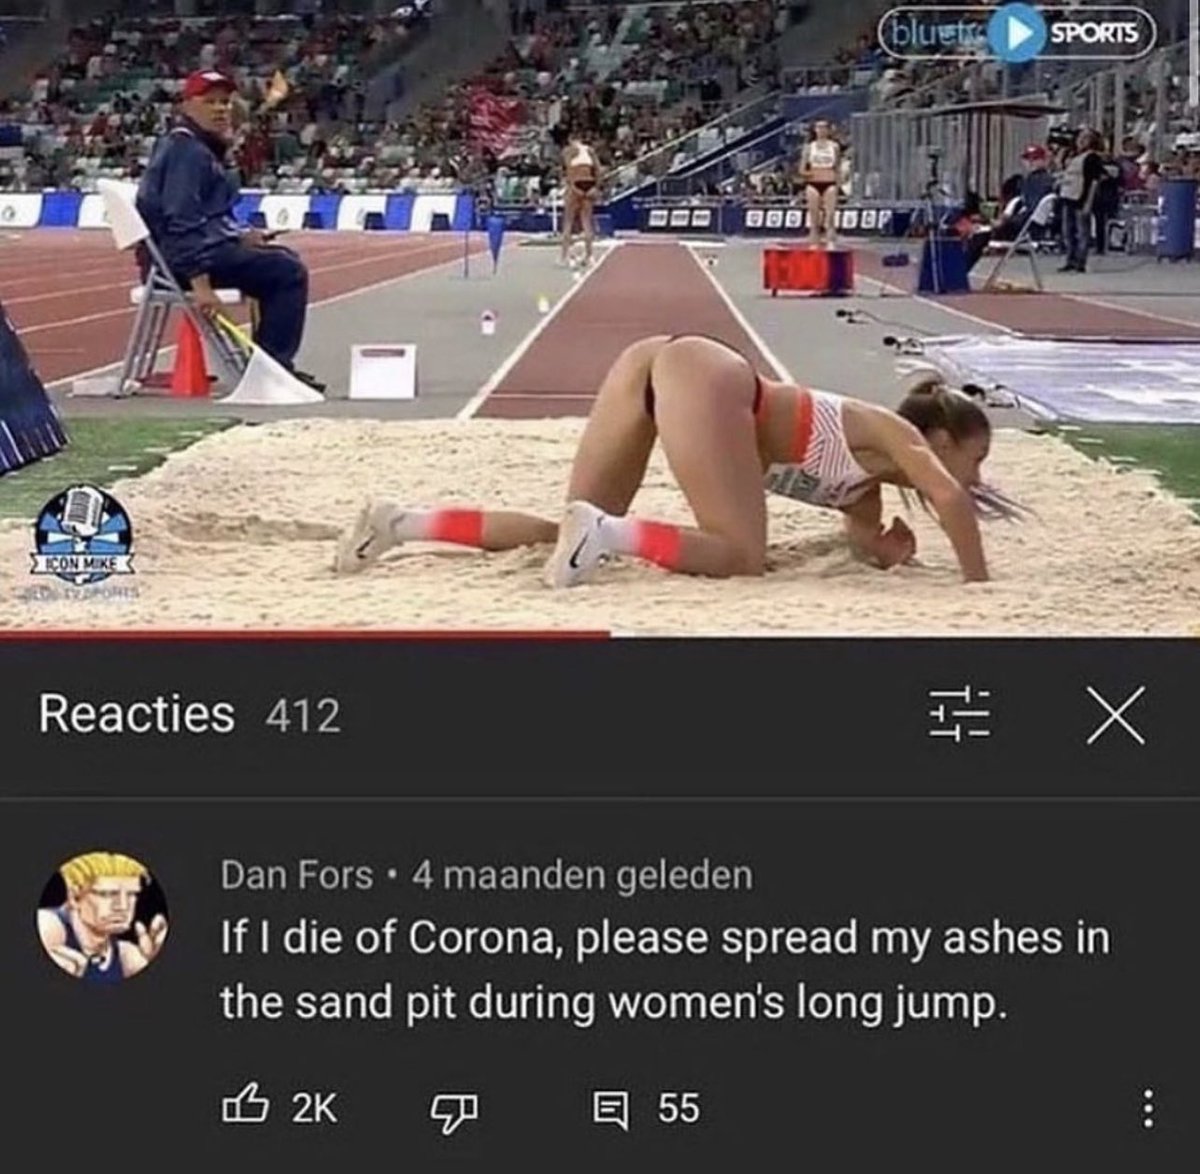 Insane YouTube Comments - womens long jump - Icon Mike Troports Reacties 412 bluetr Good Idup Sports Dan Fors 4 maanden geleden If I die of Corona, please spread my ashes in the sand pit during women's long jump. 2K E55